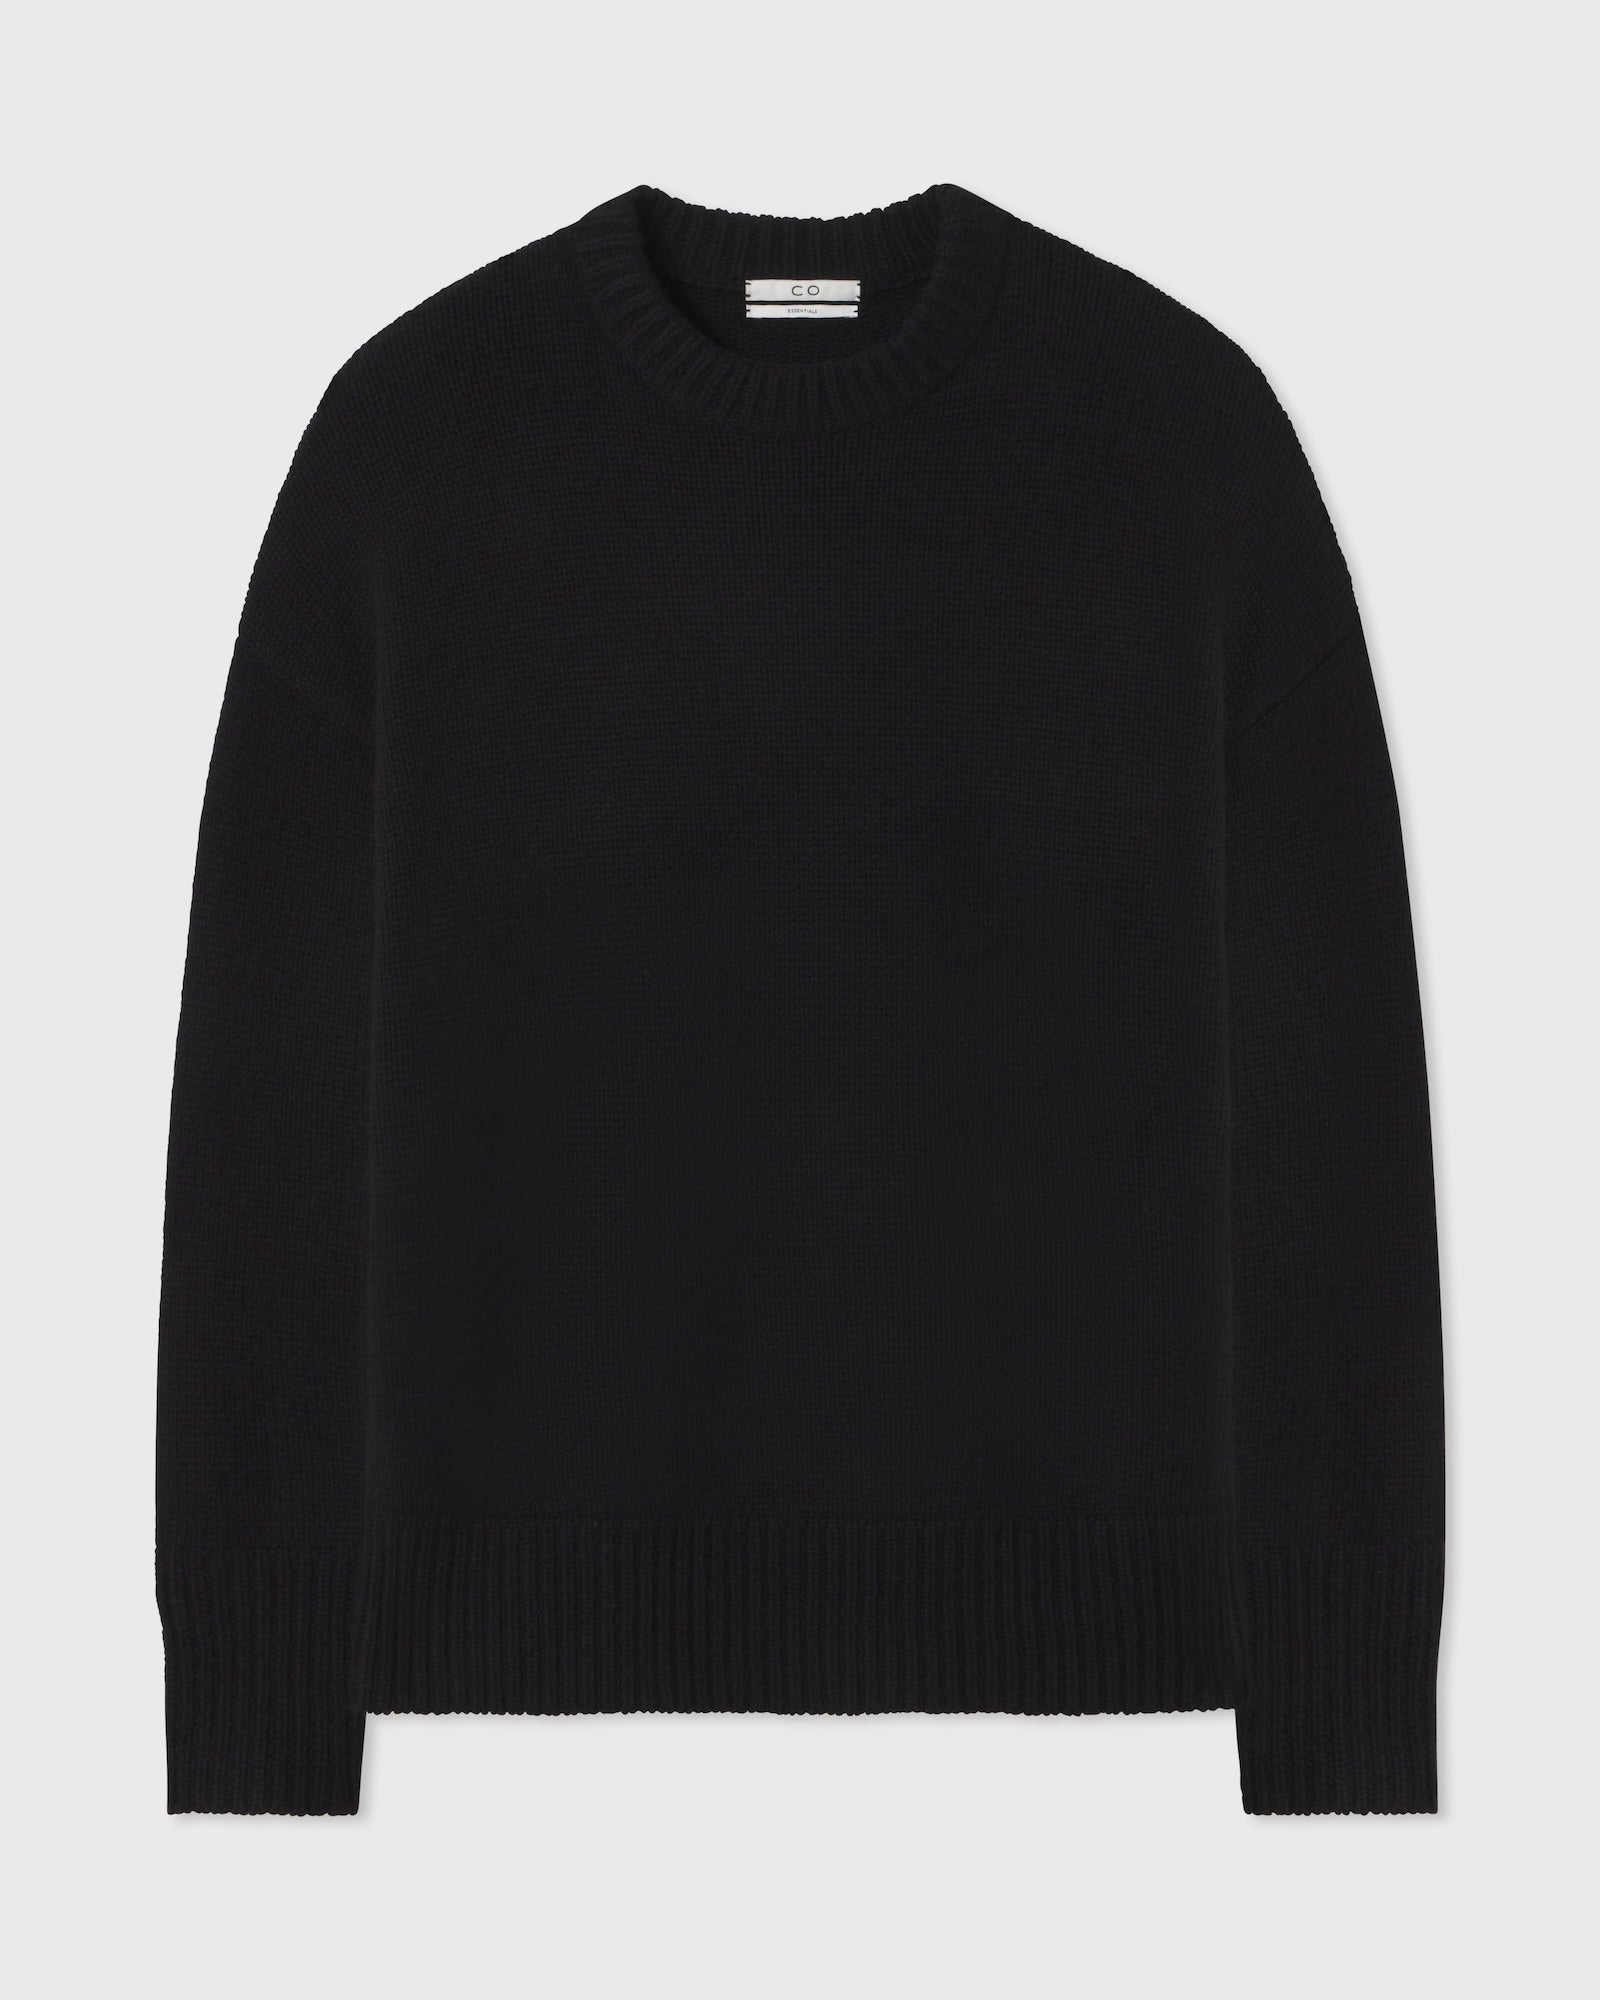 Boyfriend Crew Neck in Wool Cashmere - Black - CO Collections